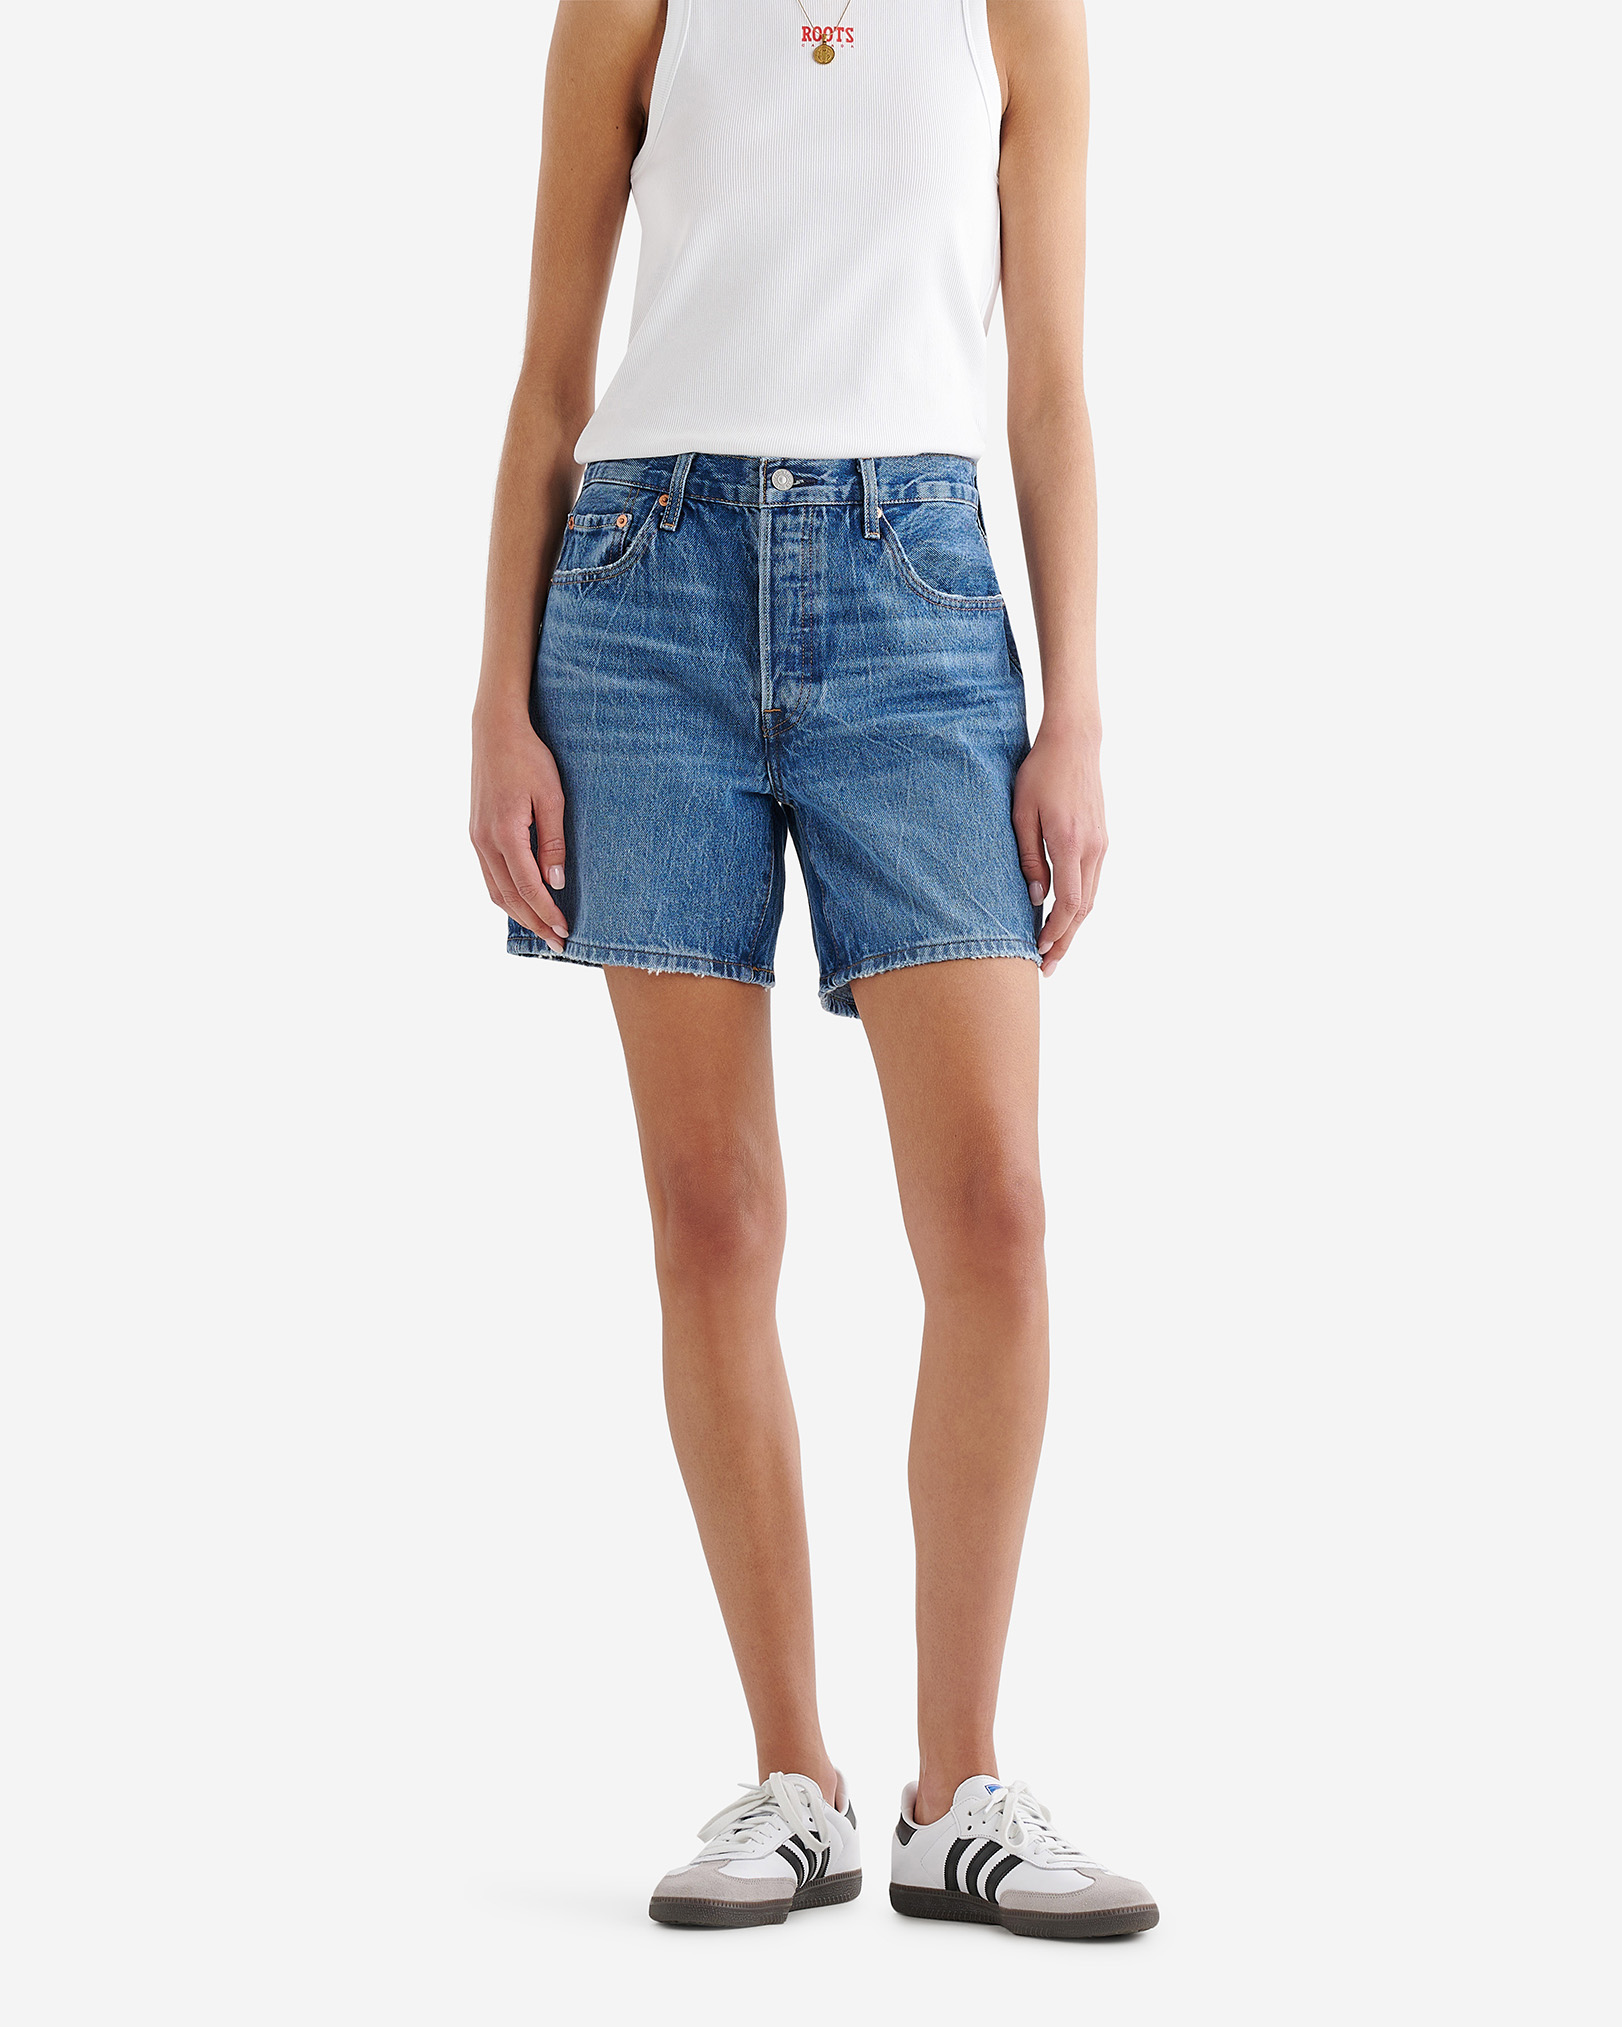 Roots Levi's 501® Mid Thigh Women's Shorts in Blue